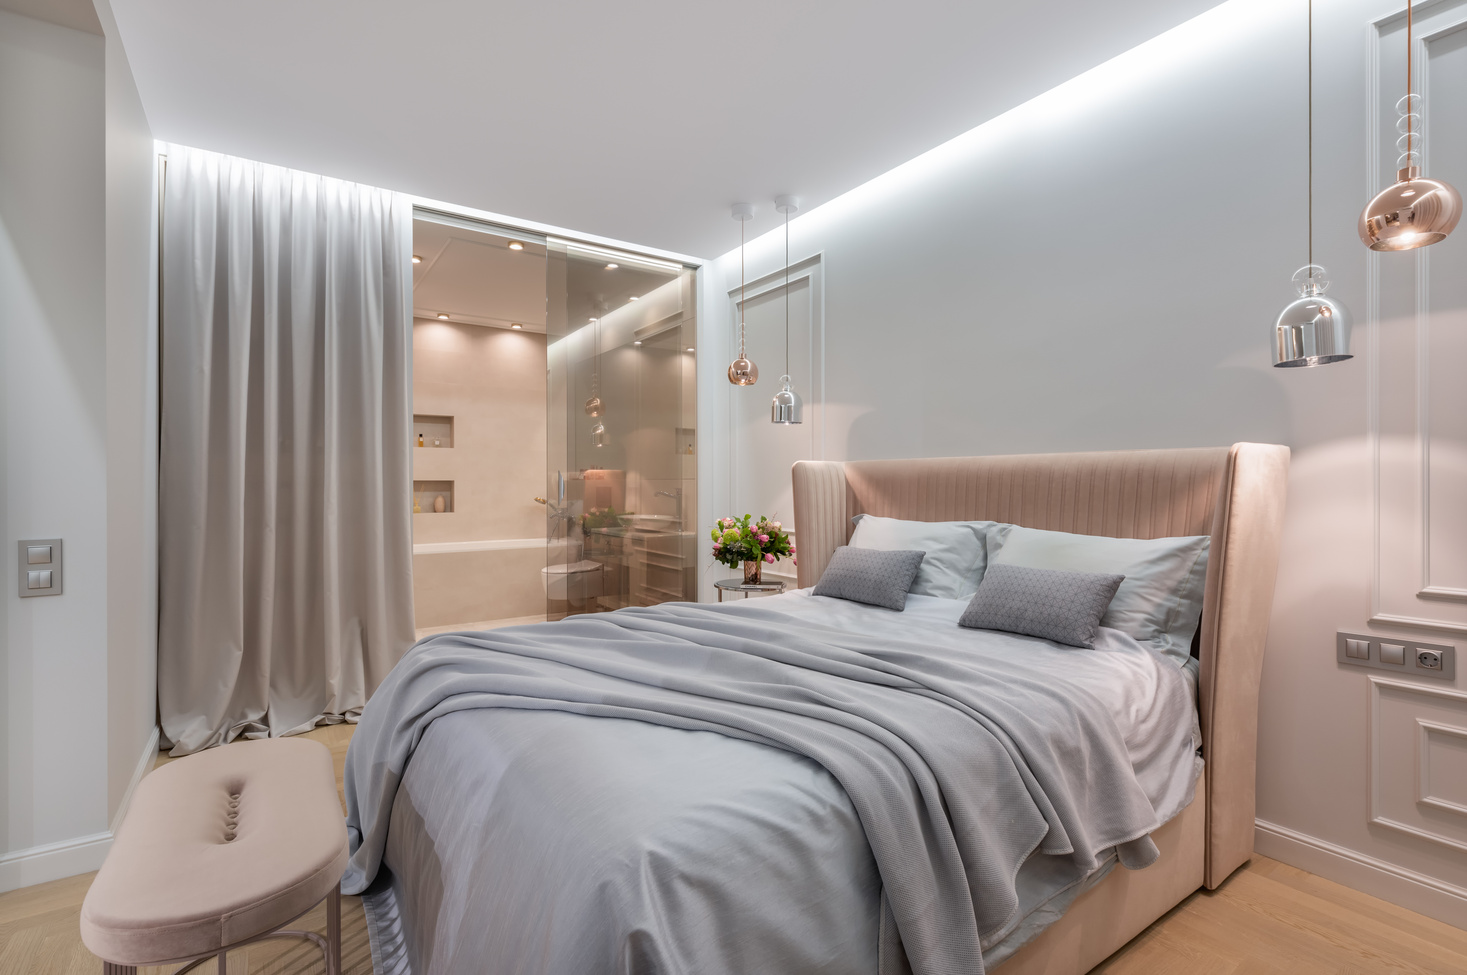 Bedroom interior with bed near pouf